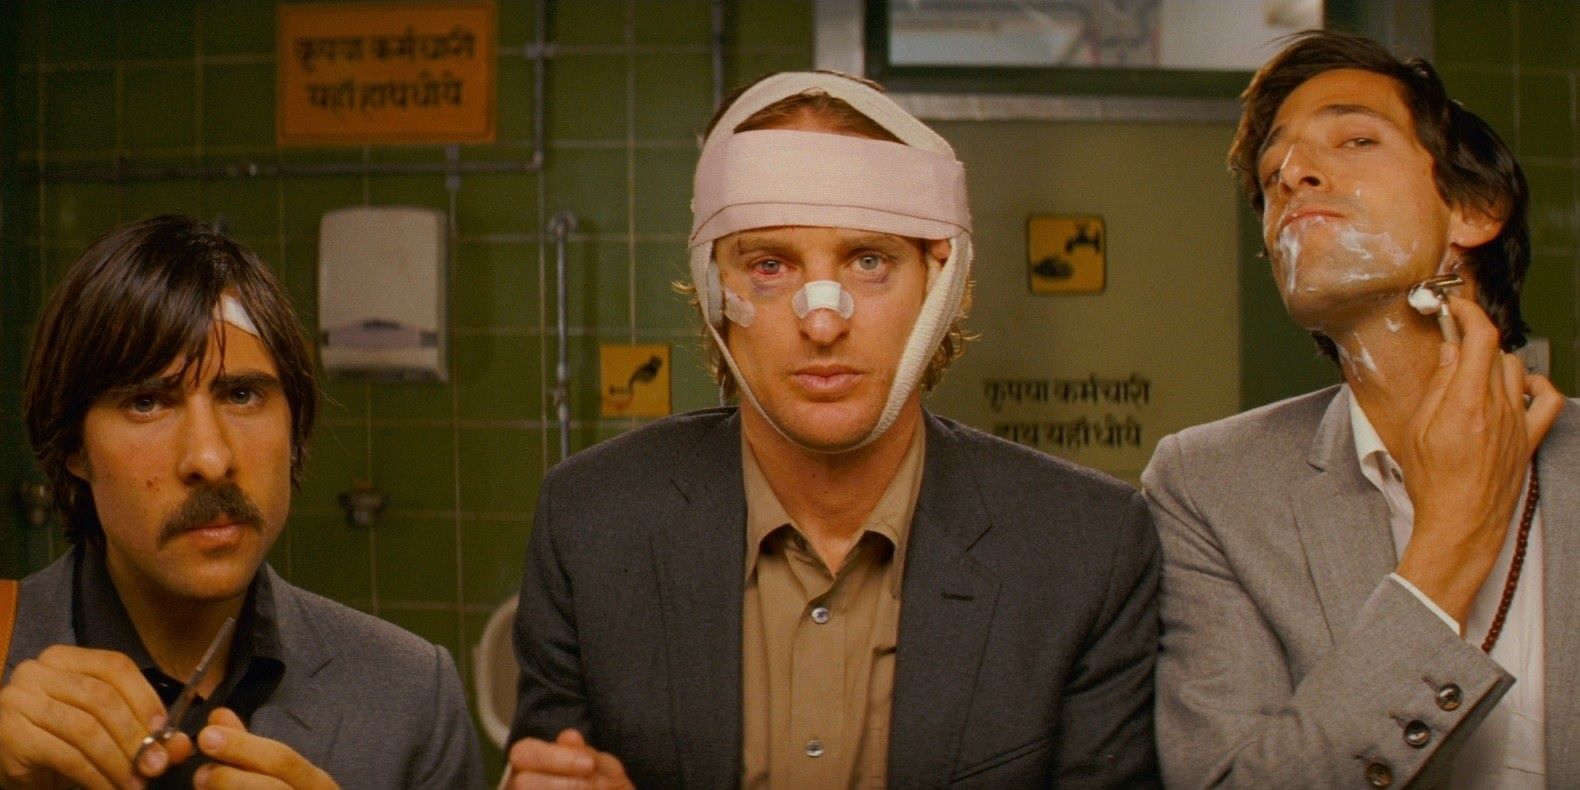 Francis, Peter, and Jack in The Darjeeling Limited